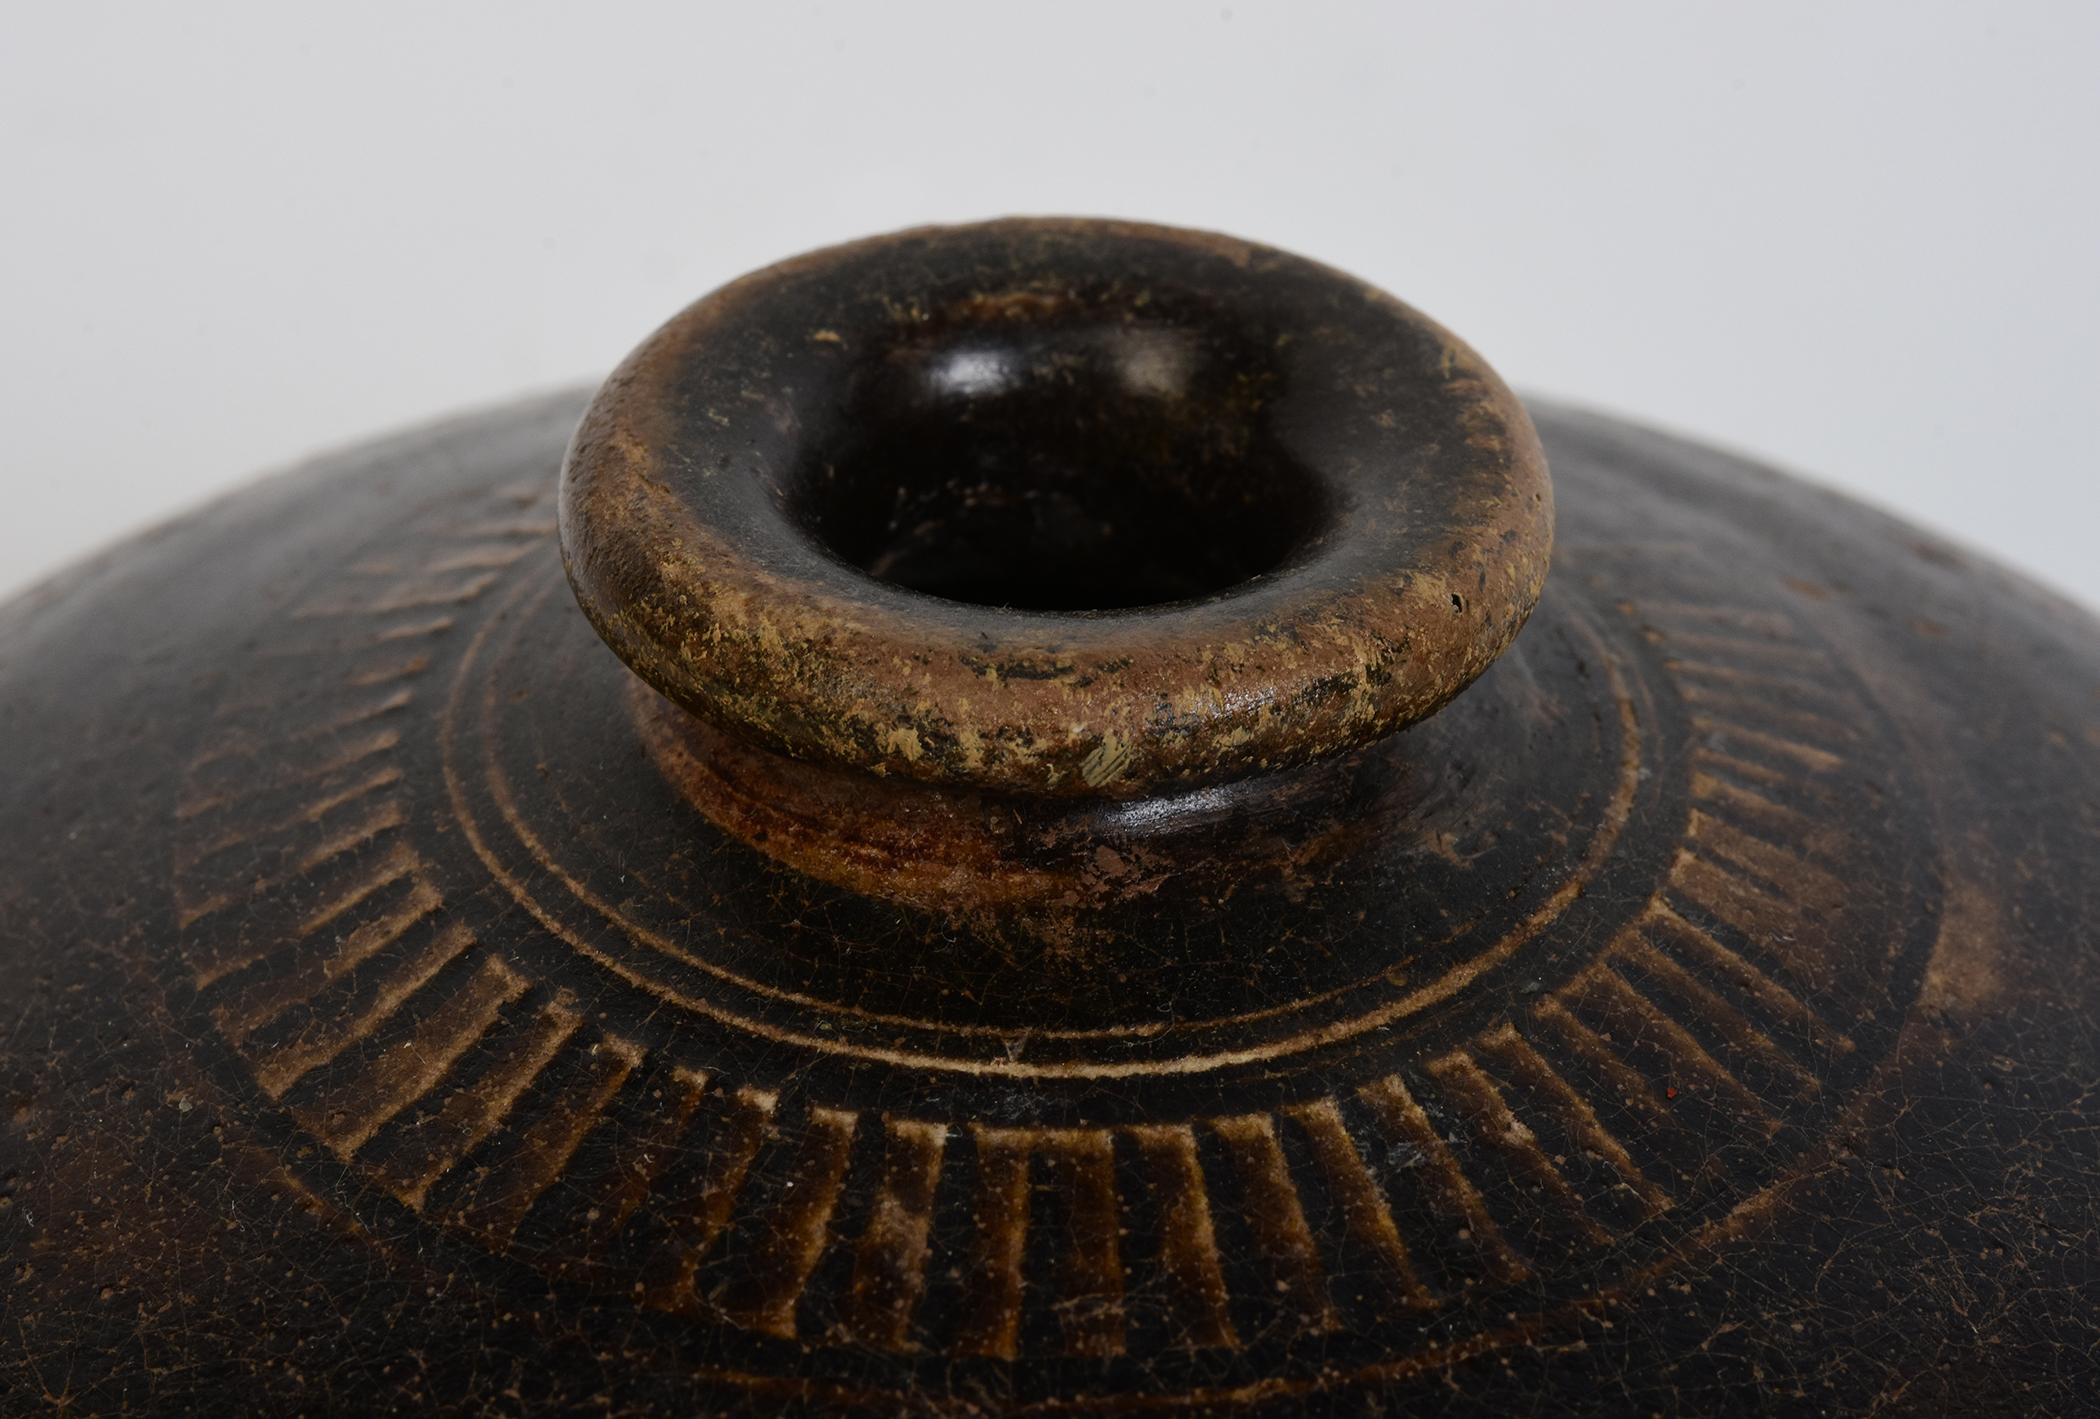 Antique Khmer dark-brown glazed pottery honey pot.

Age: Cambodia, Bayon Period, 12th - 13th Century
Size: Height 9 C.M. / Width 13.8 C.M.
Condition: Nice glaze and condition overall (some glaze chips and natural wearings).

100% Satisfaction and